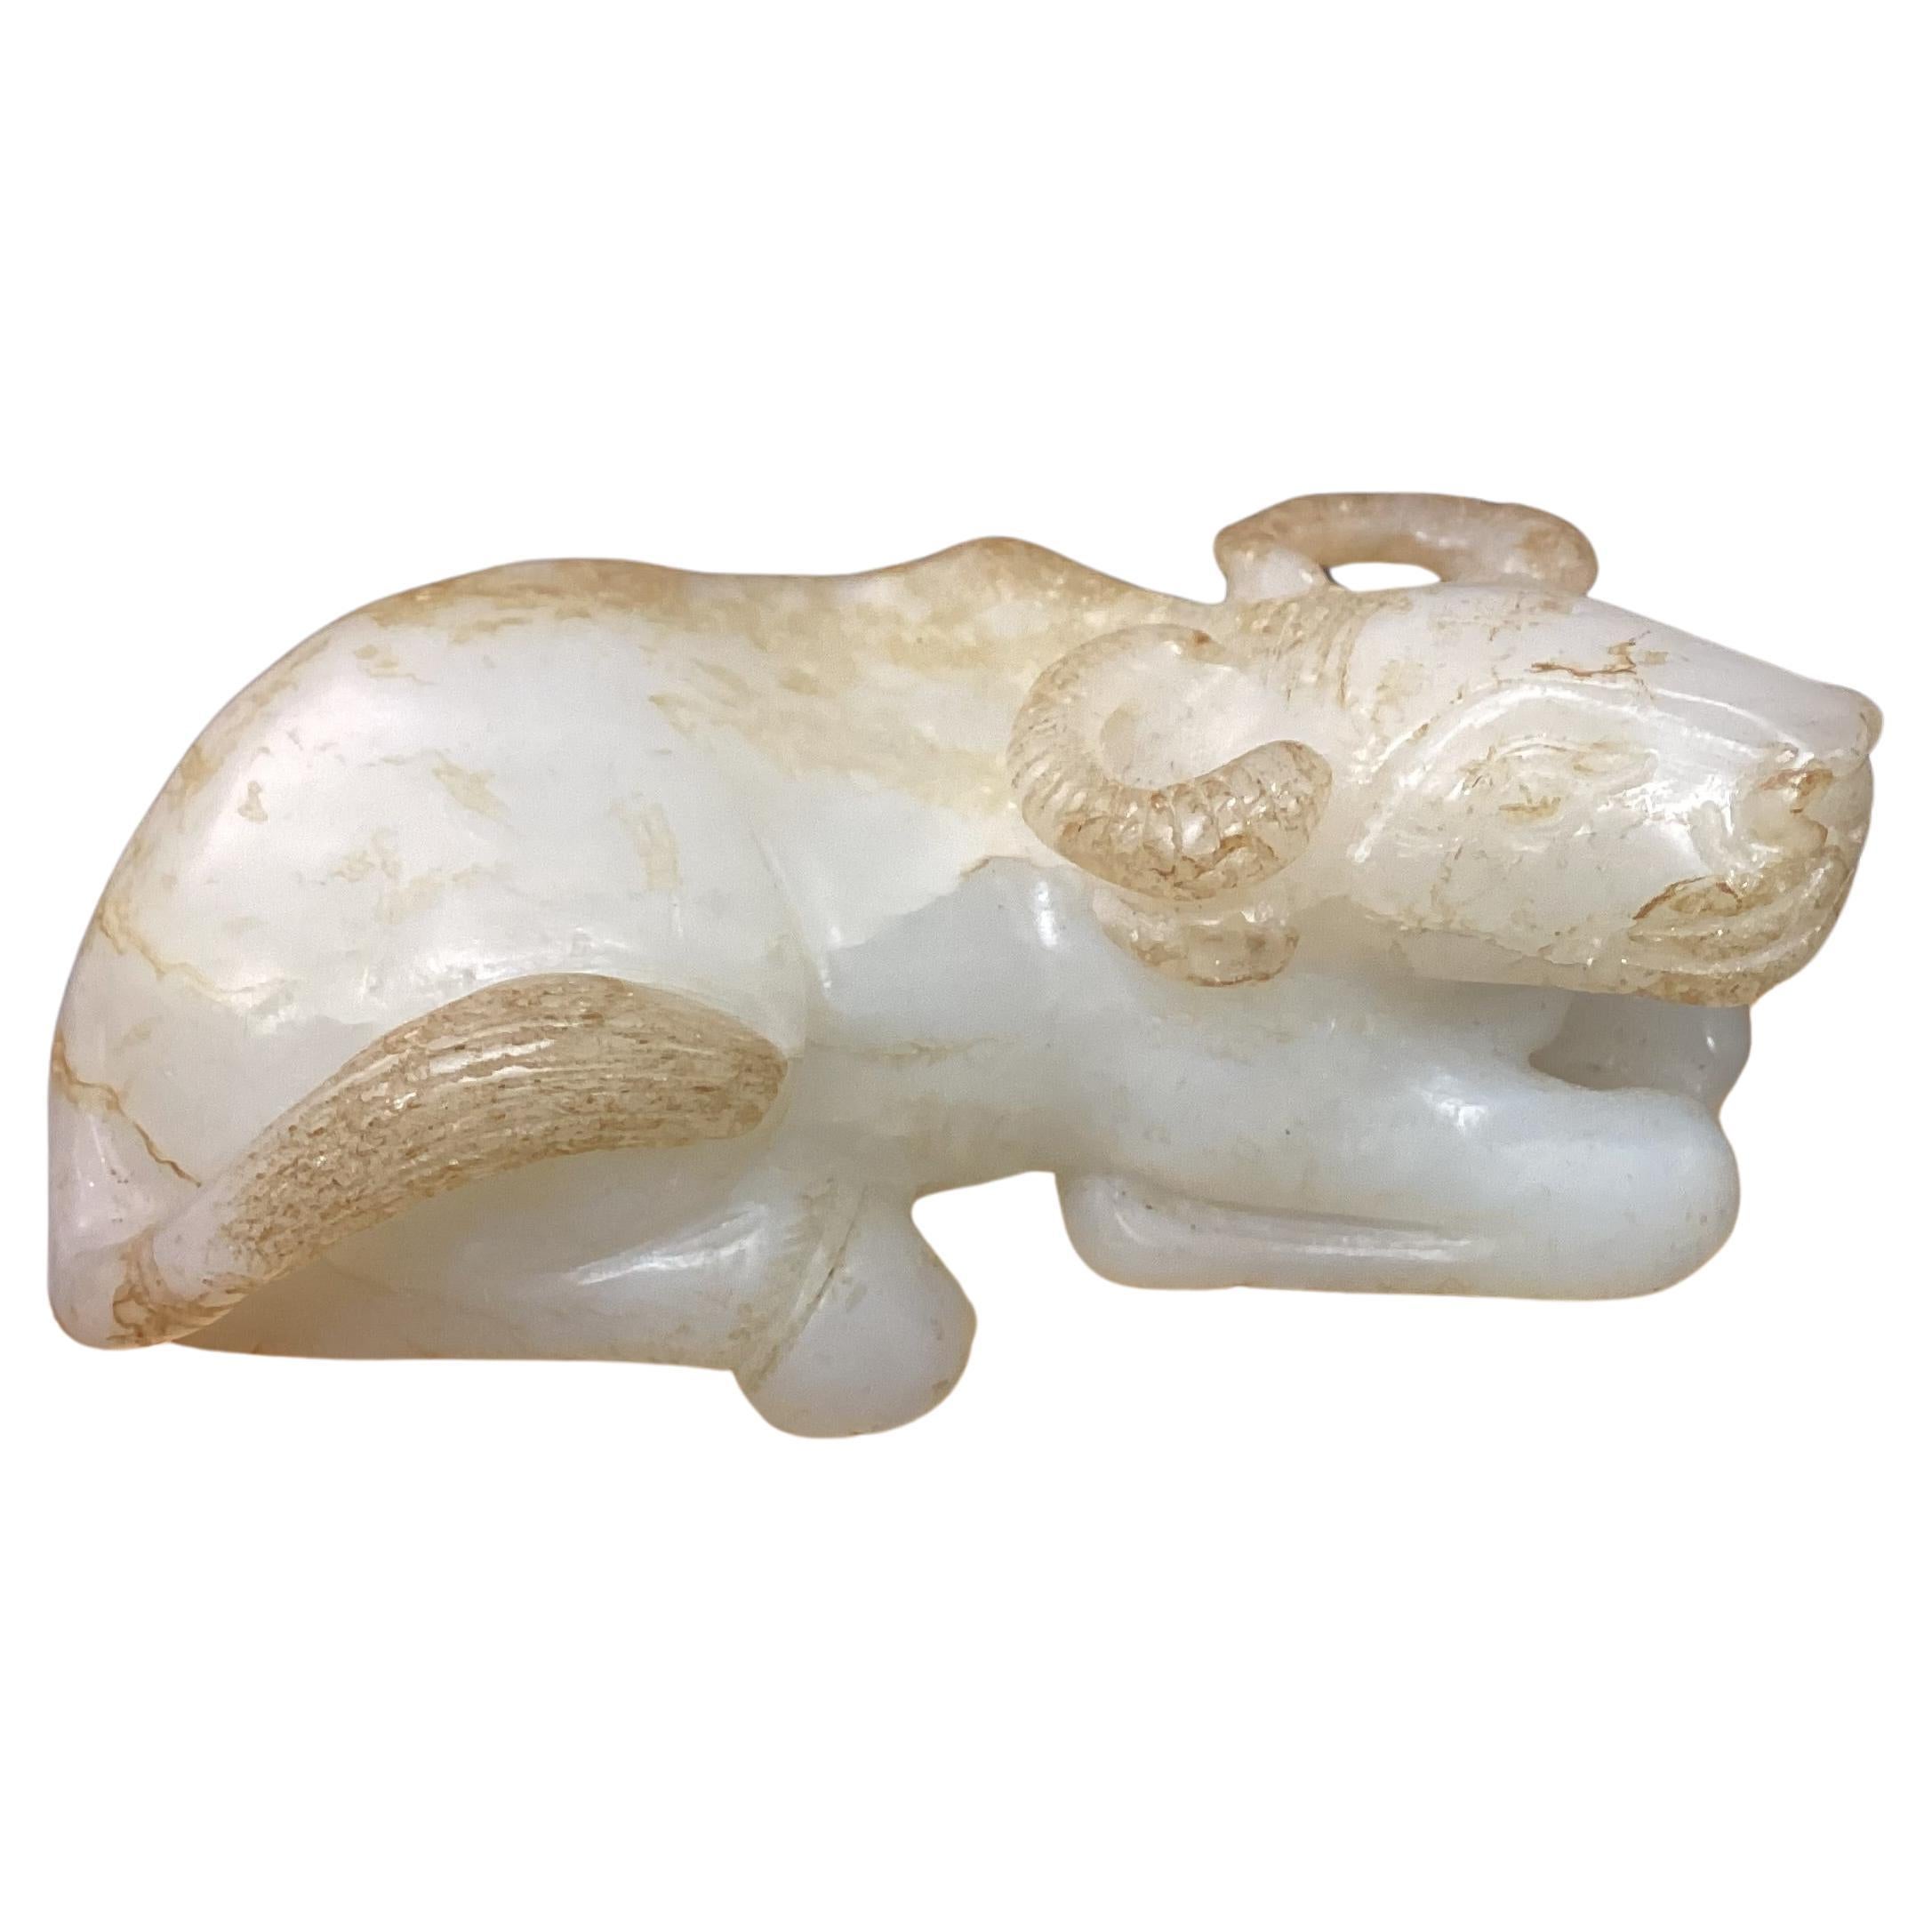 19th century white jade carving of recumbent water buffalo. Buffalo is lying with legs tucked beneath its body, head is raised in an attentive gaze, and its tail is curved over the hind quarters. Color is white with areas of russet and brown